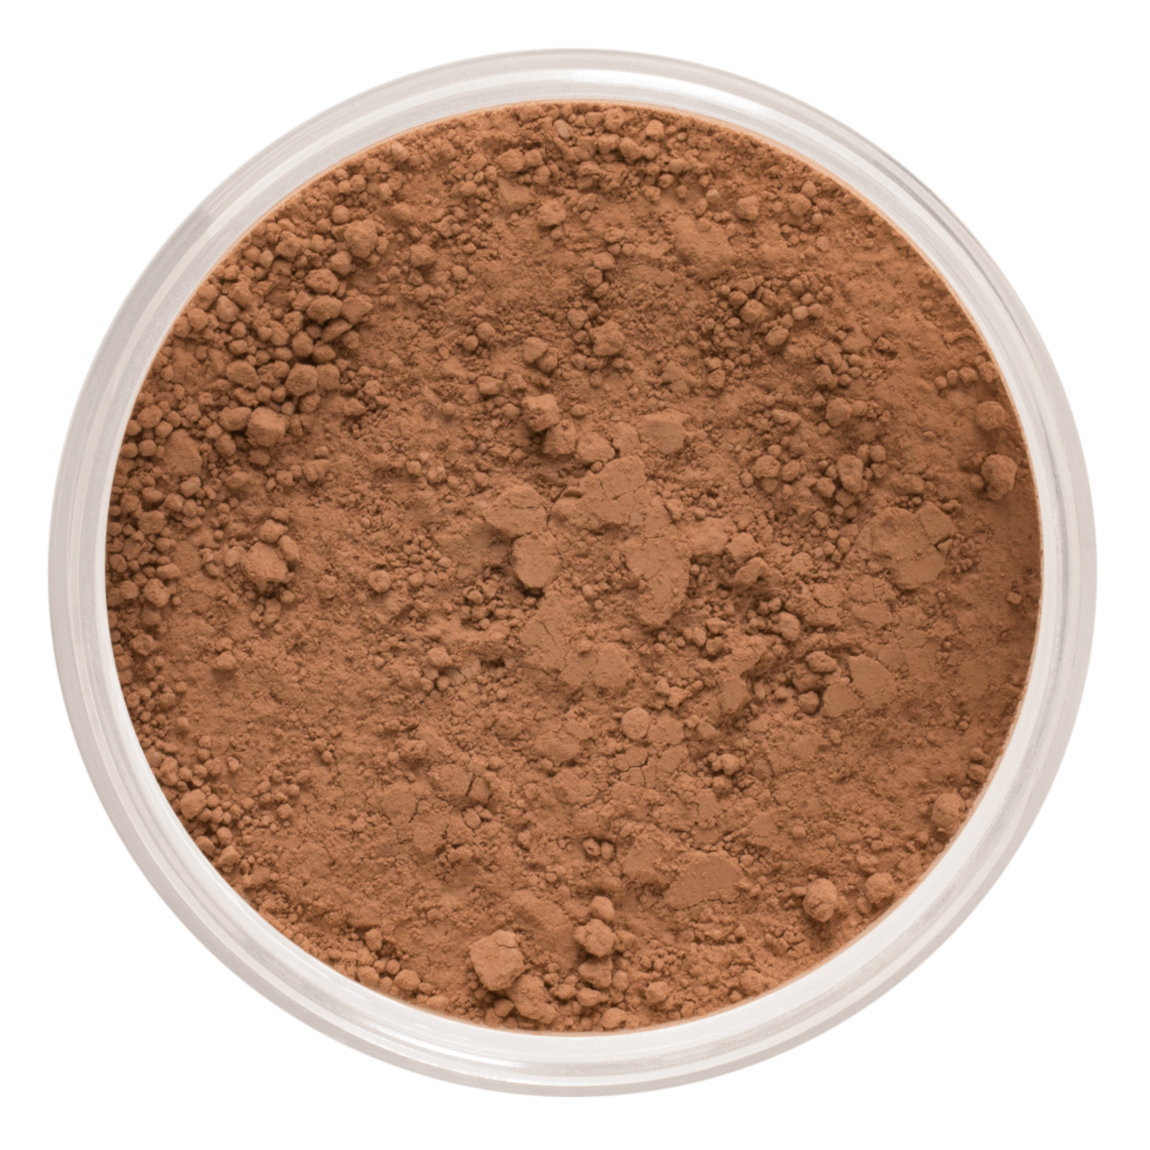 Make-Up Atelier Loose Powder (25 g) PLMTN3 Natural Umber 3 alternative view 1 - product swatch.